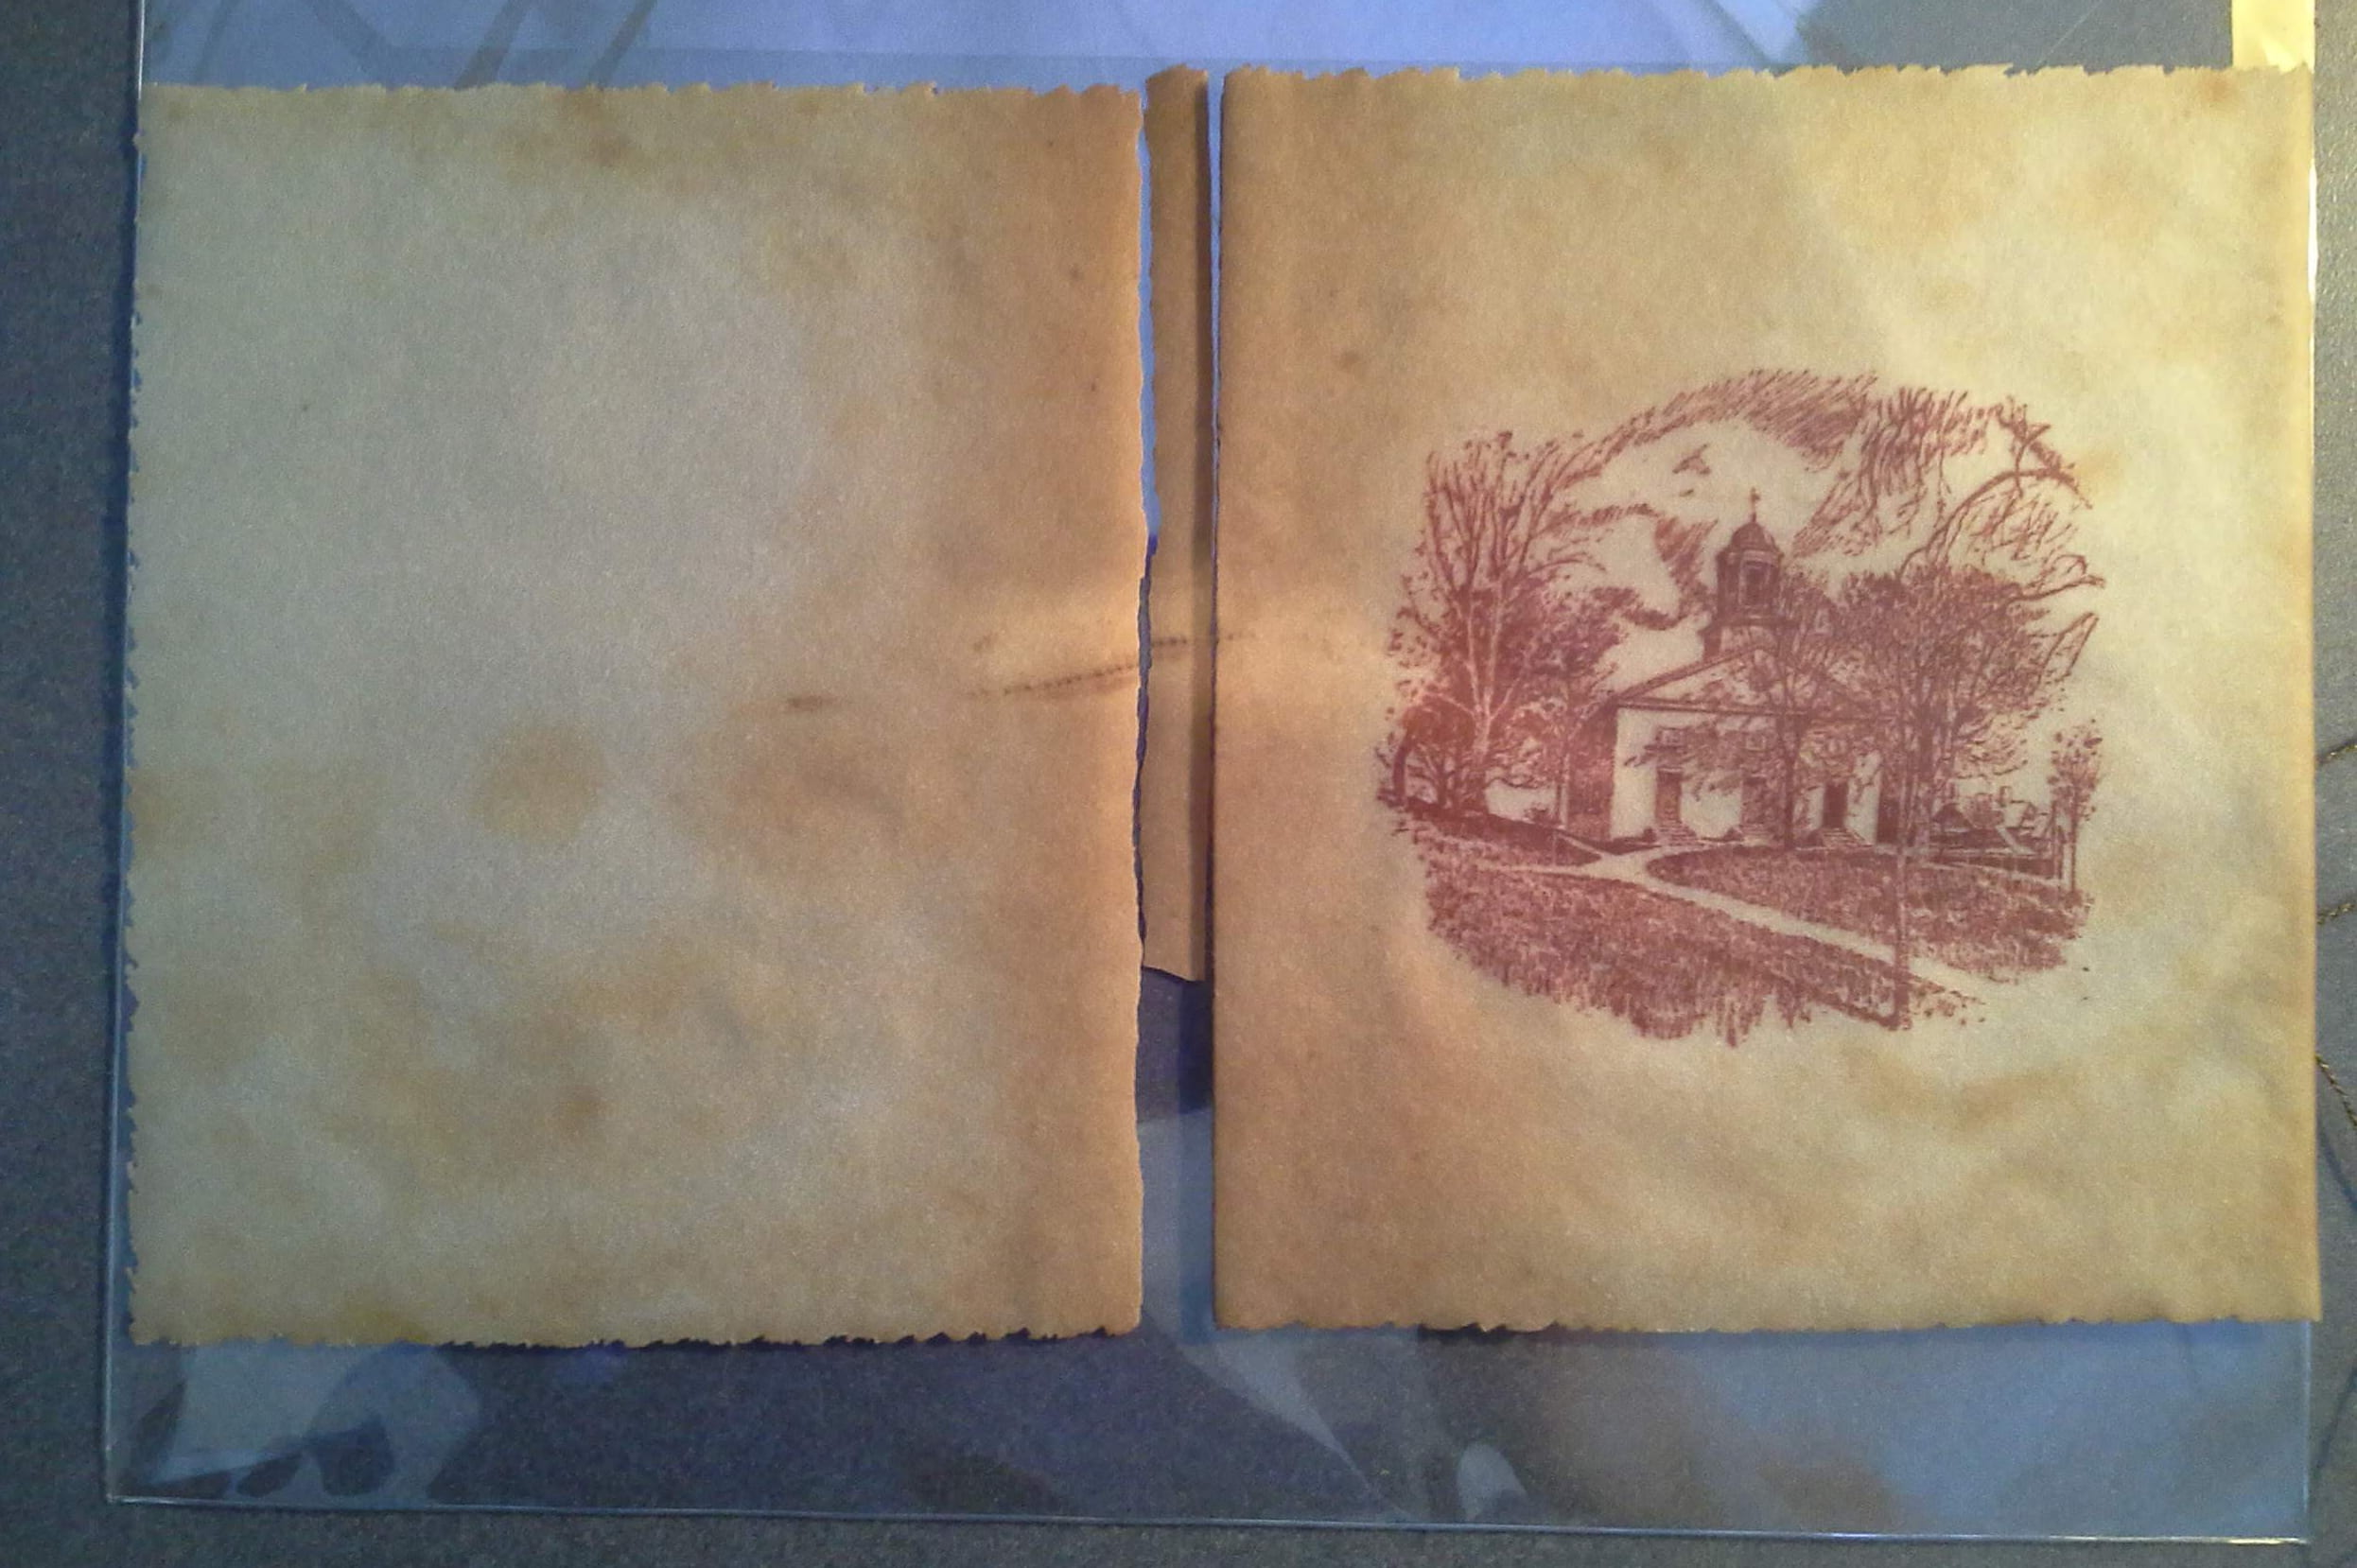 A picture of College Hall is printed in purple ink on a light brown piece of material, about 14 inches wide. The piece is broken halfway across, where the material was folded like a book cover.